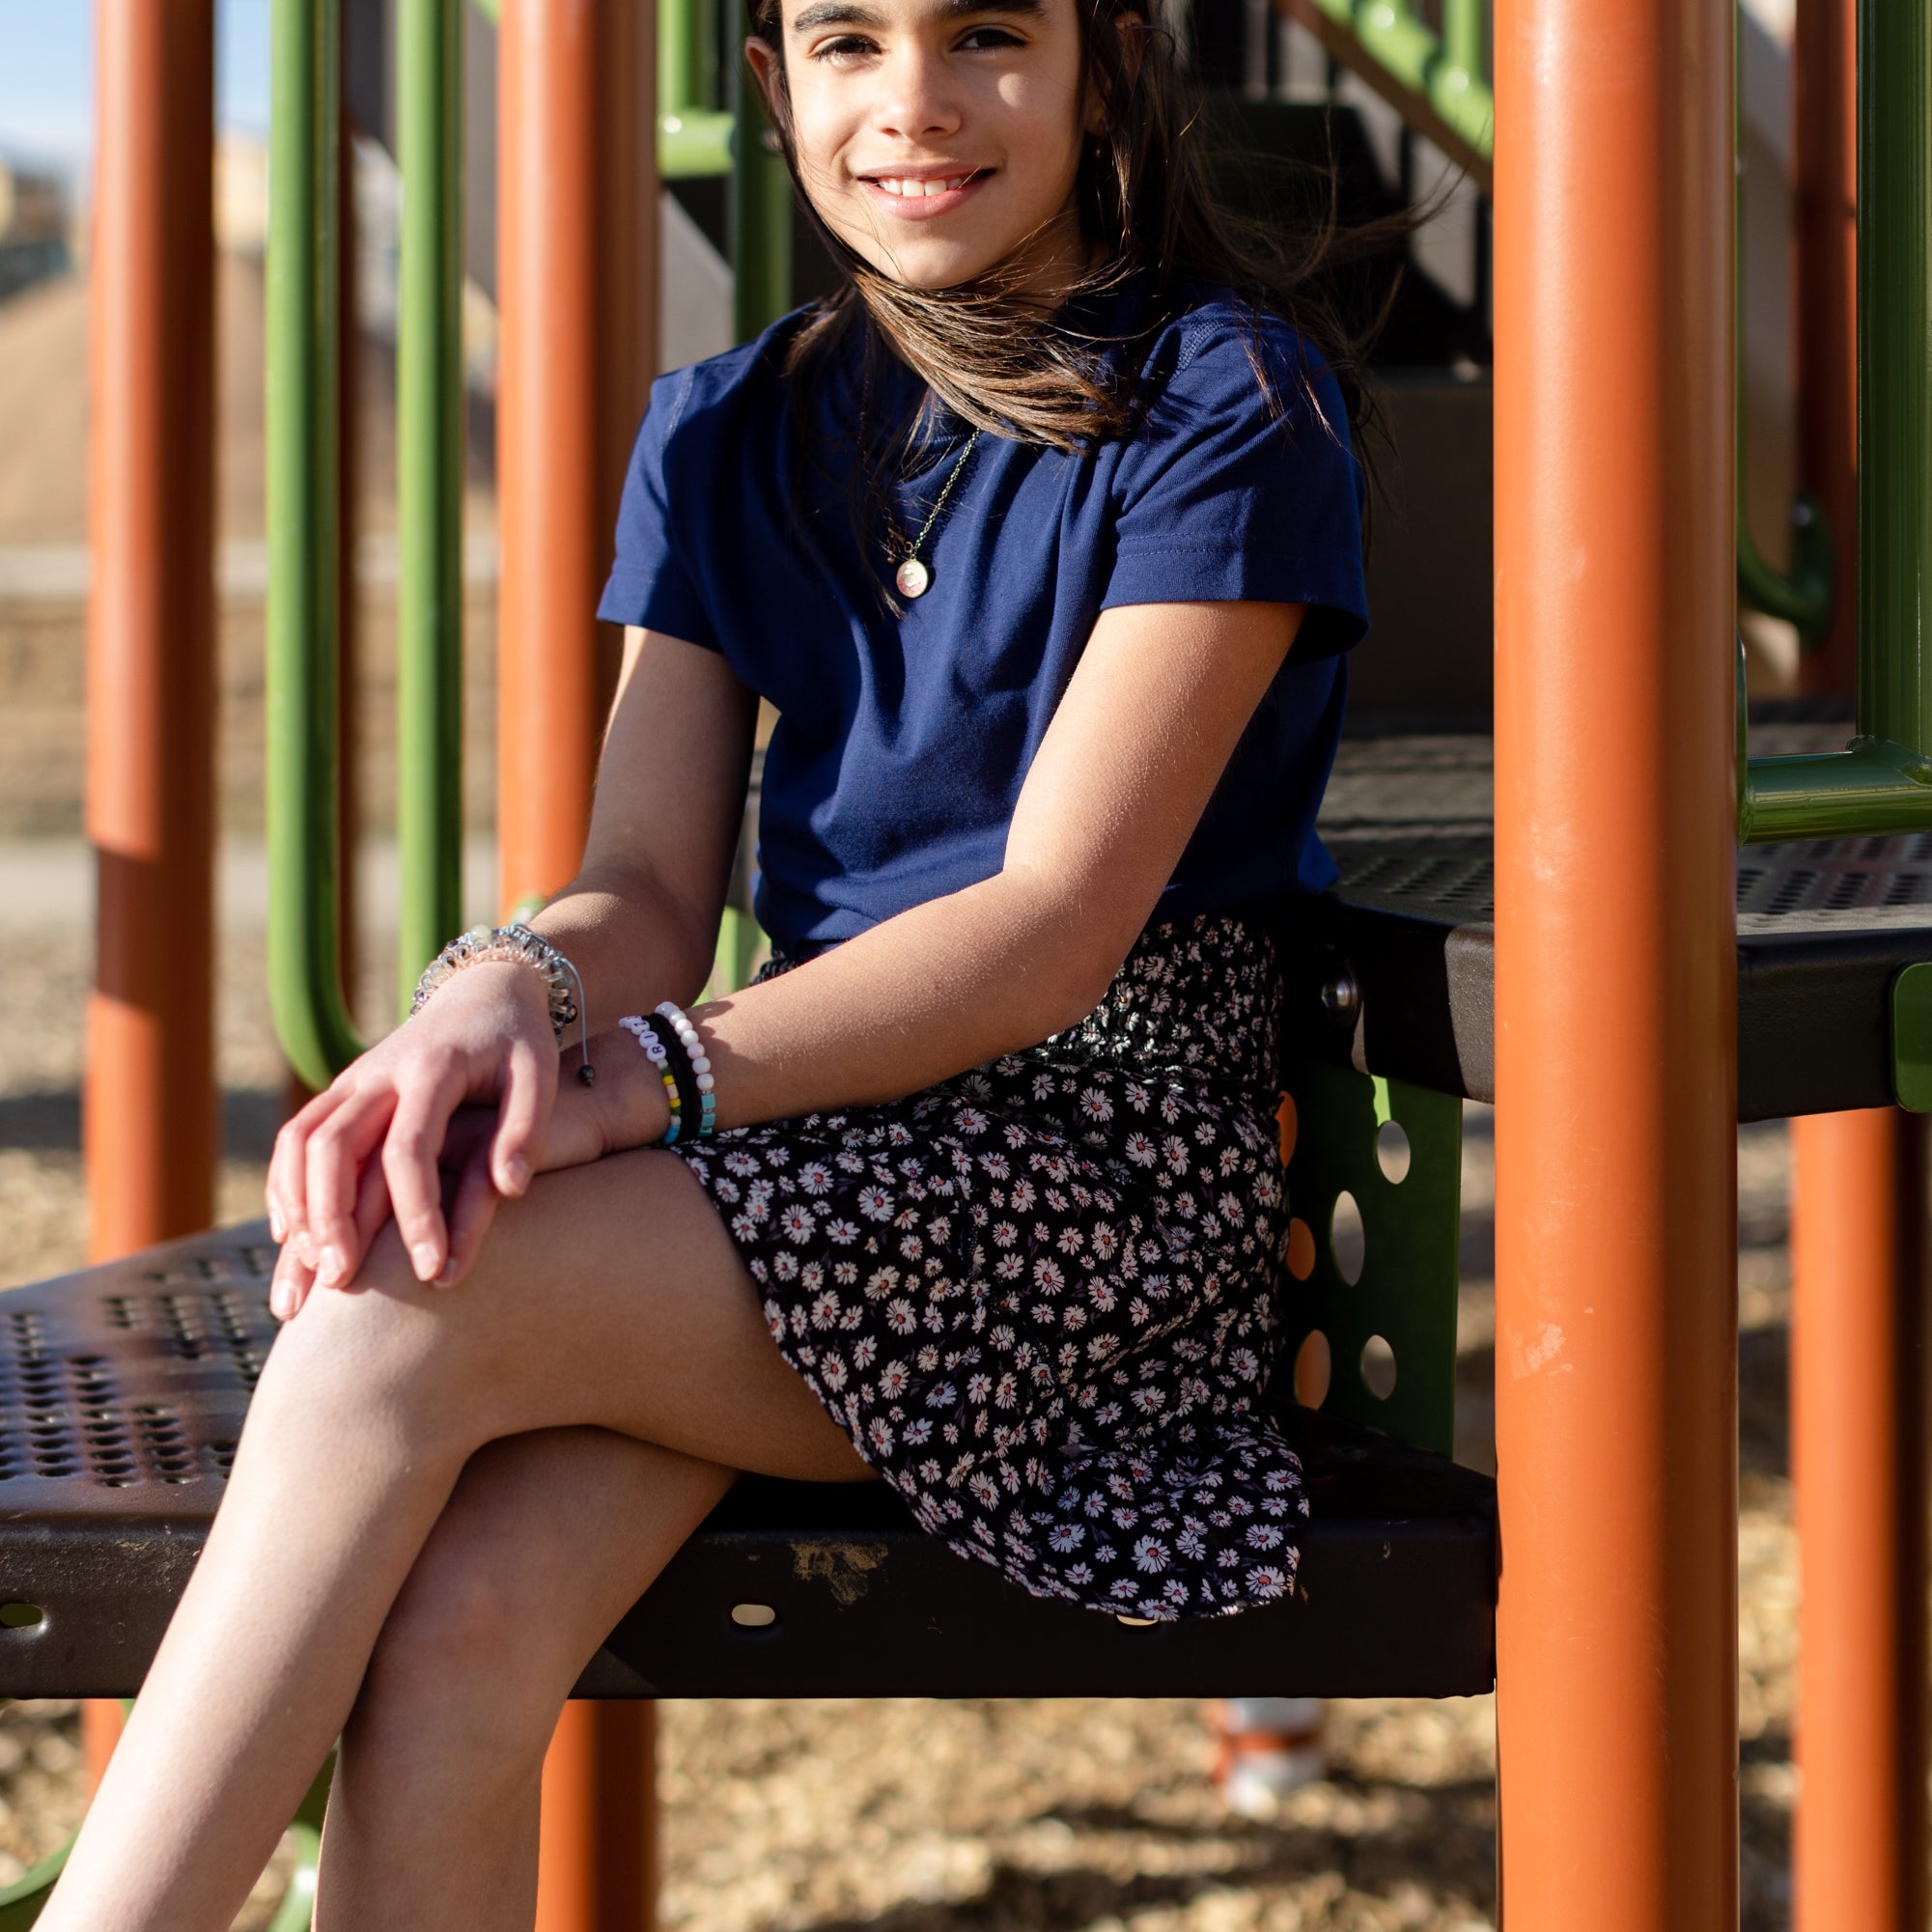 A little girl is wearing a navy blue crewneck t-shirt. She is wearing a black and white skirt with black and white shoes. She is also sitting on a jungle gym. The colors of the jungle gym are orange, green and black.